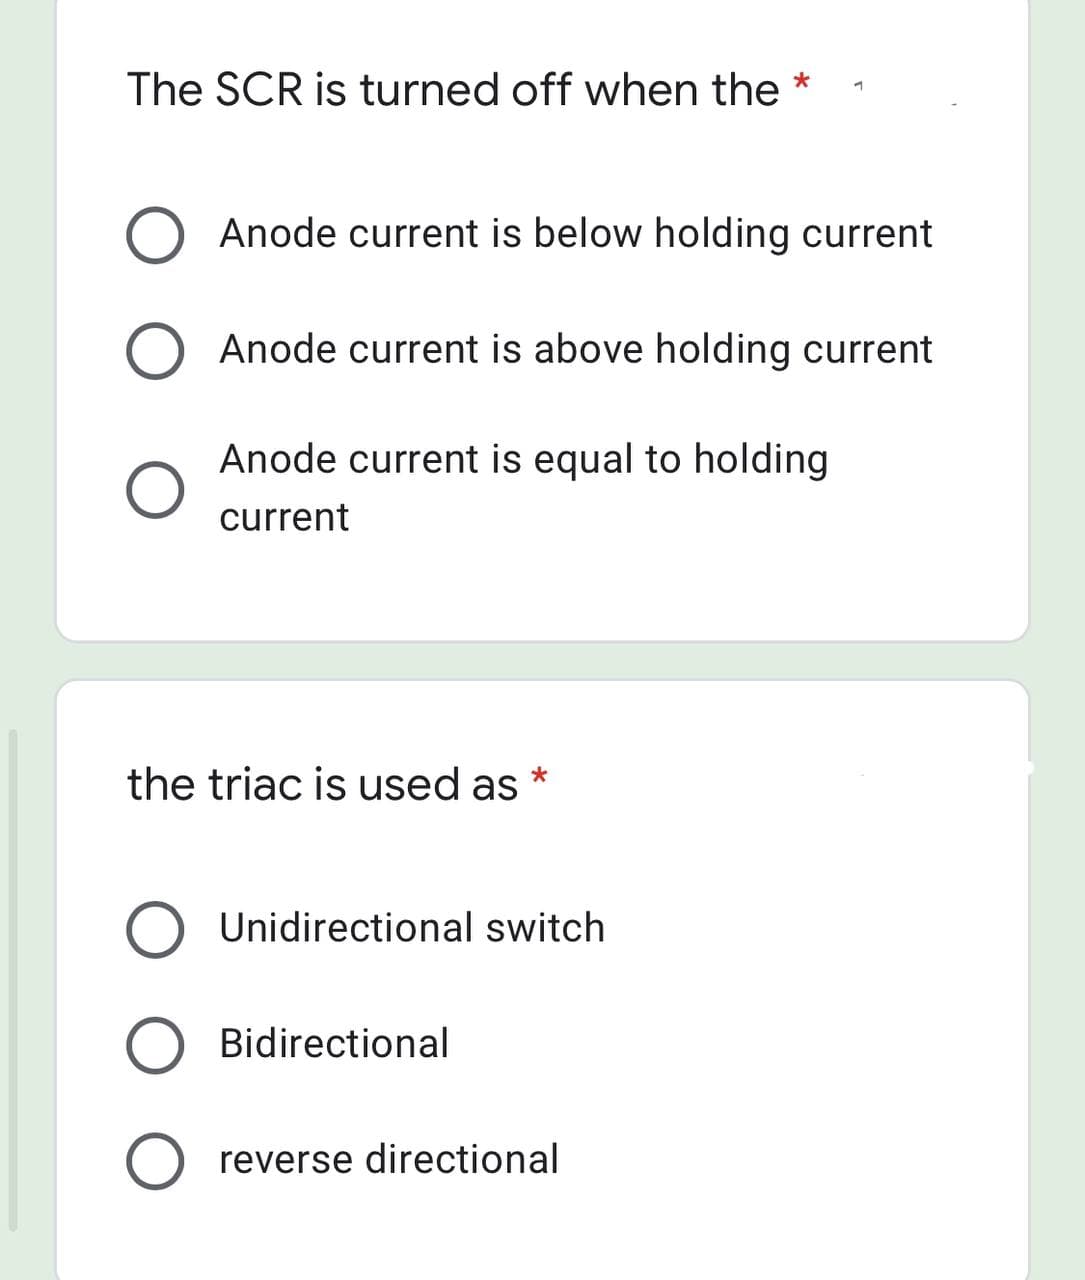 The SCR is turned off when the
Anode current is below holding current
O Anode current is above holding current
Anode current is equal to holding
current
the triac is used as
Unidirectional switch
Bidirectional
reverse directional
